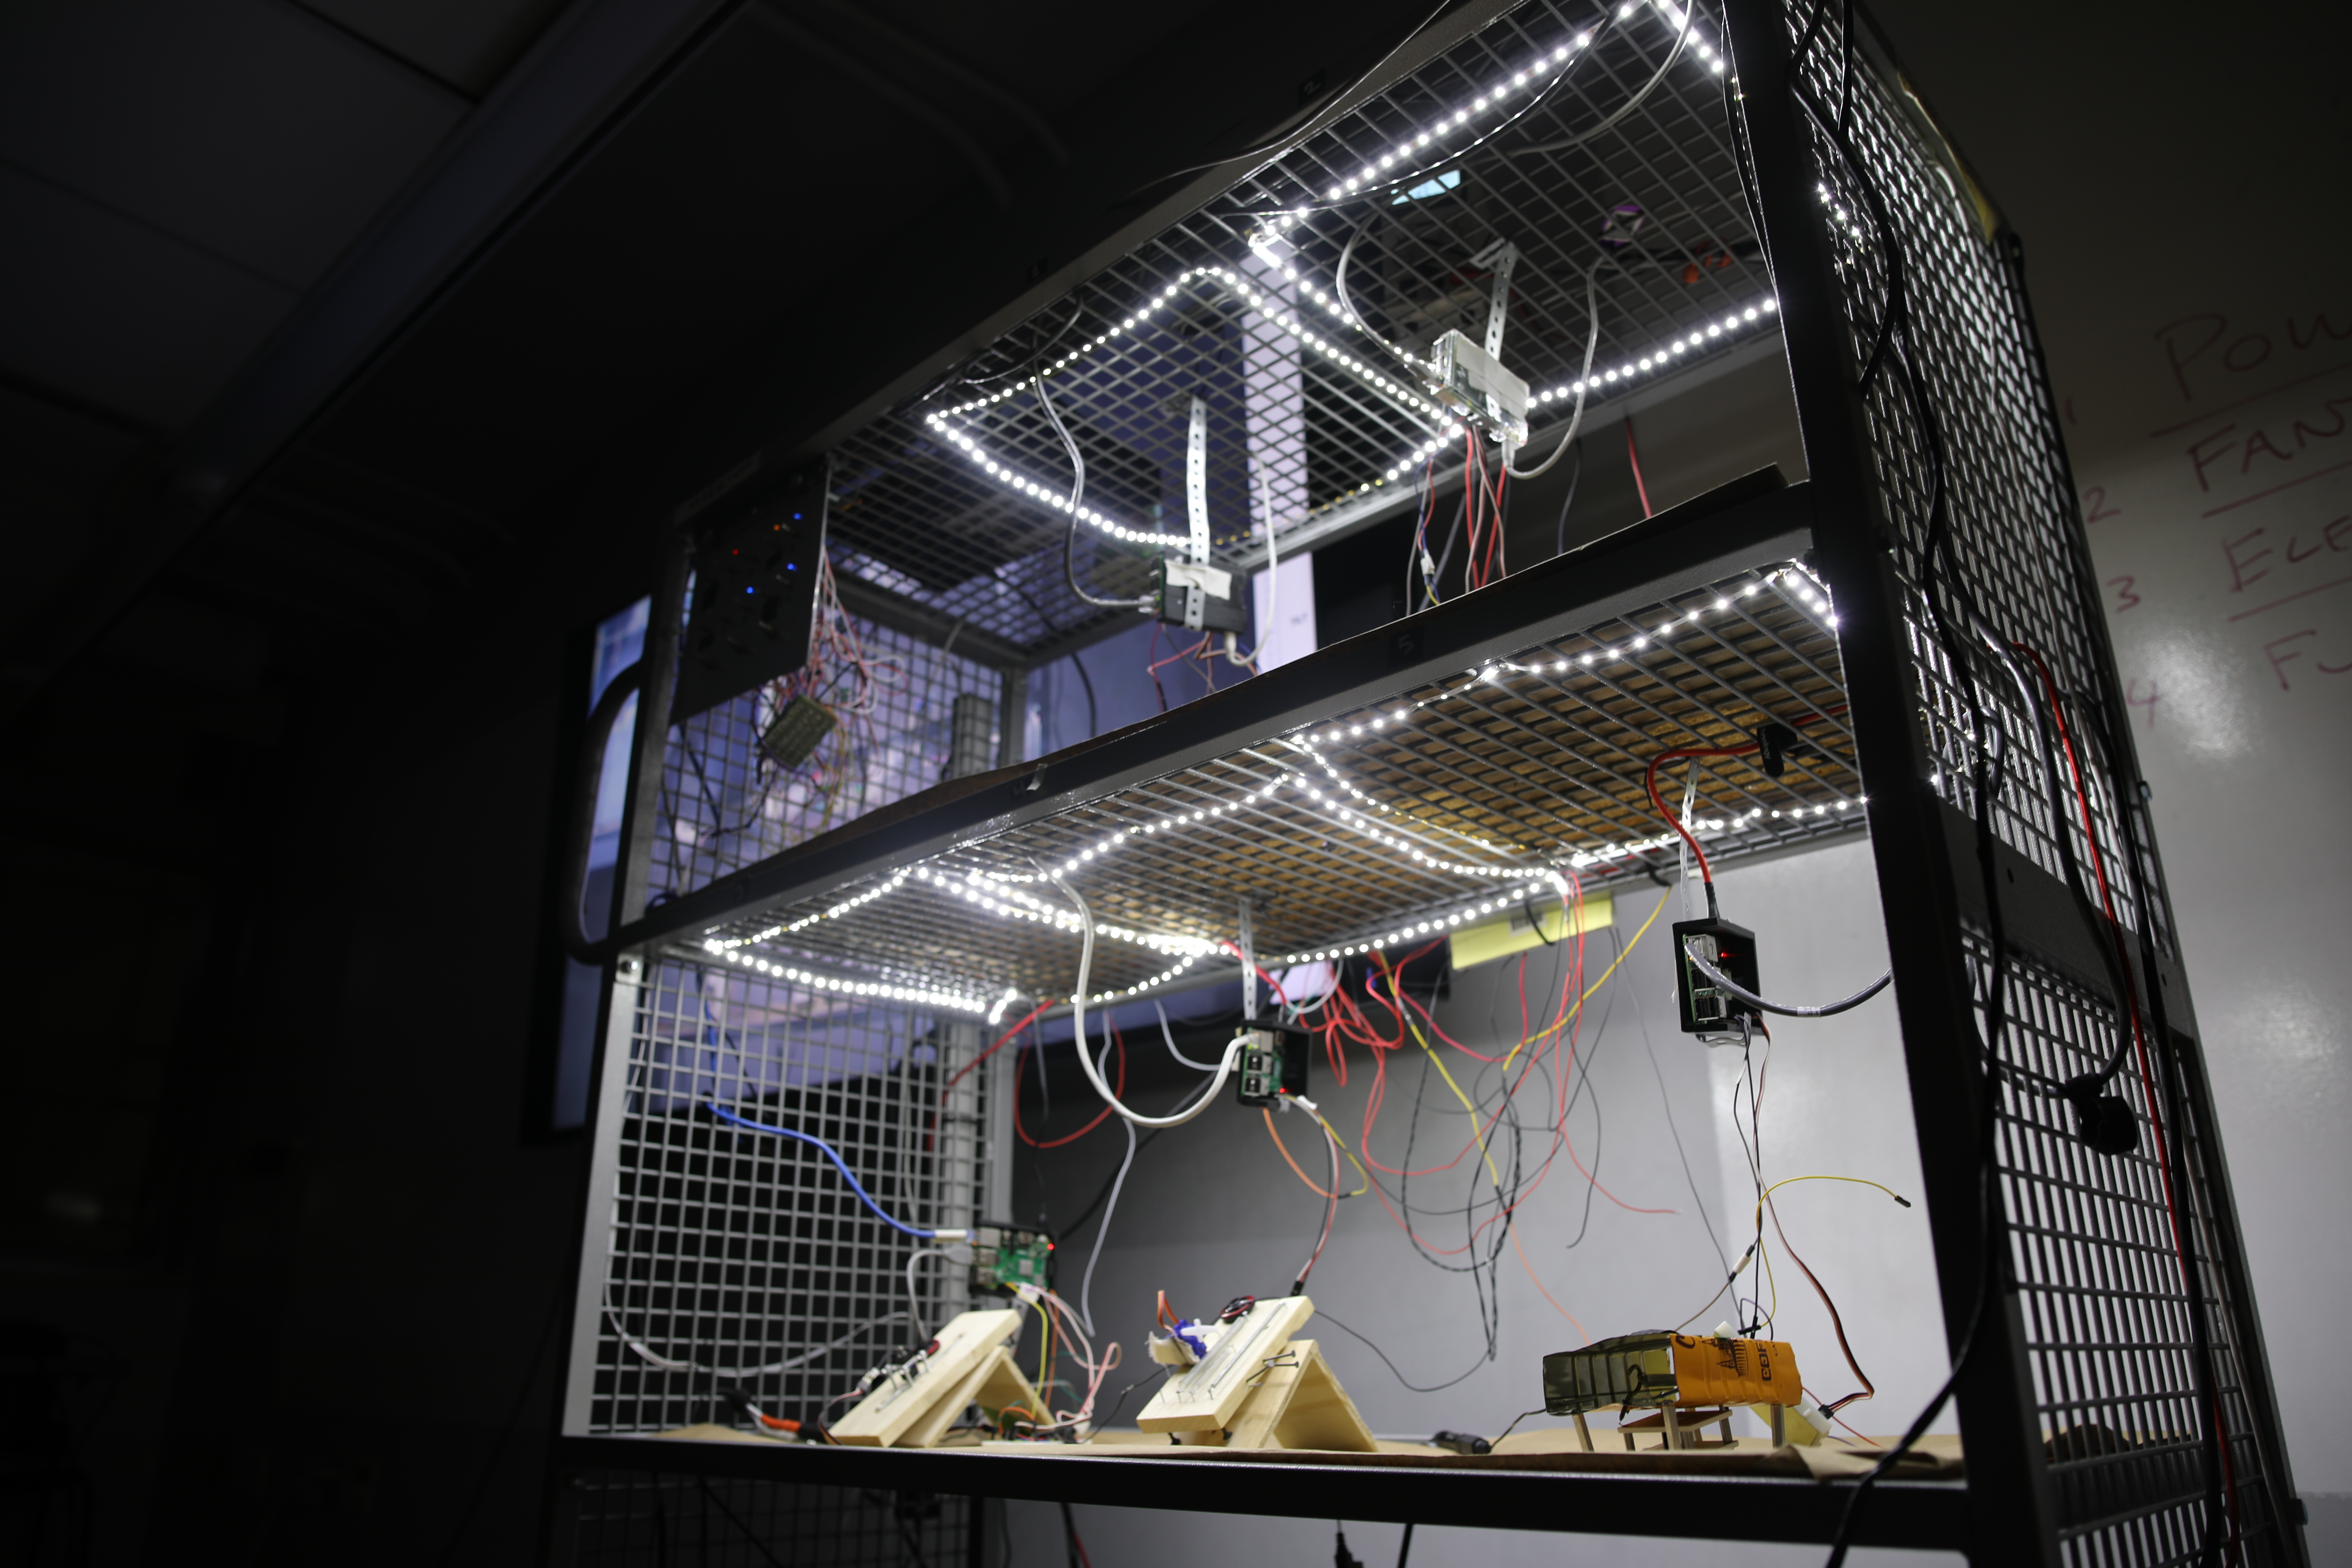 This instrument interprets the physical and digital labor of computer networking technology. It is made with 9 computers with custom server code, DIY electronics, and recycled objects.